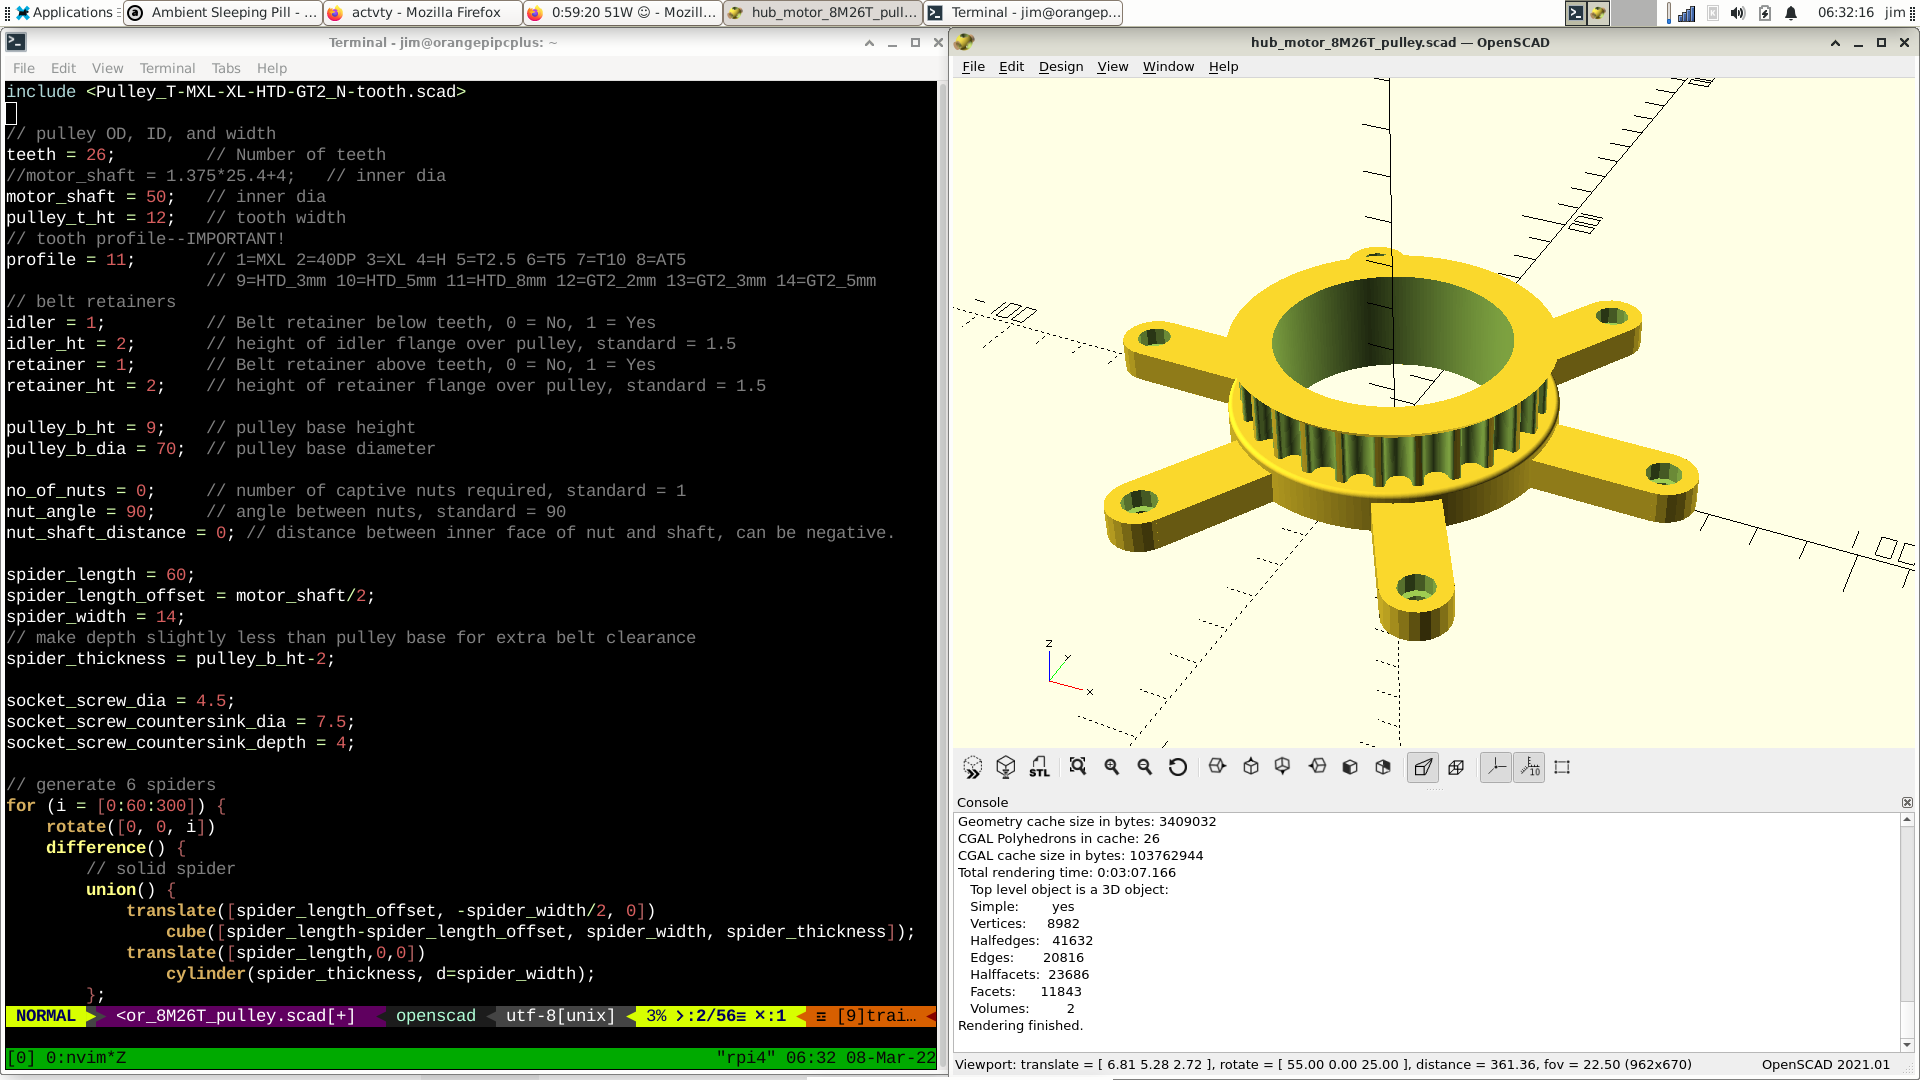 screenshot of a terminal window and OpenSCAD